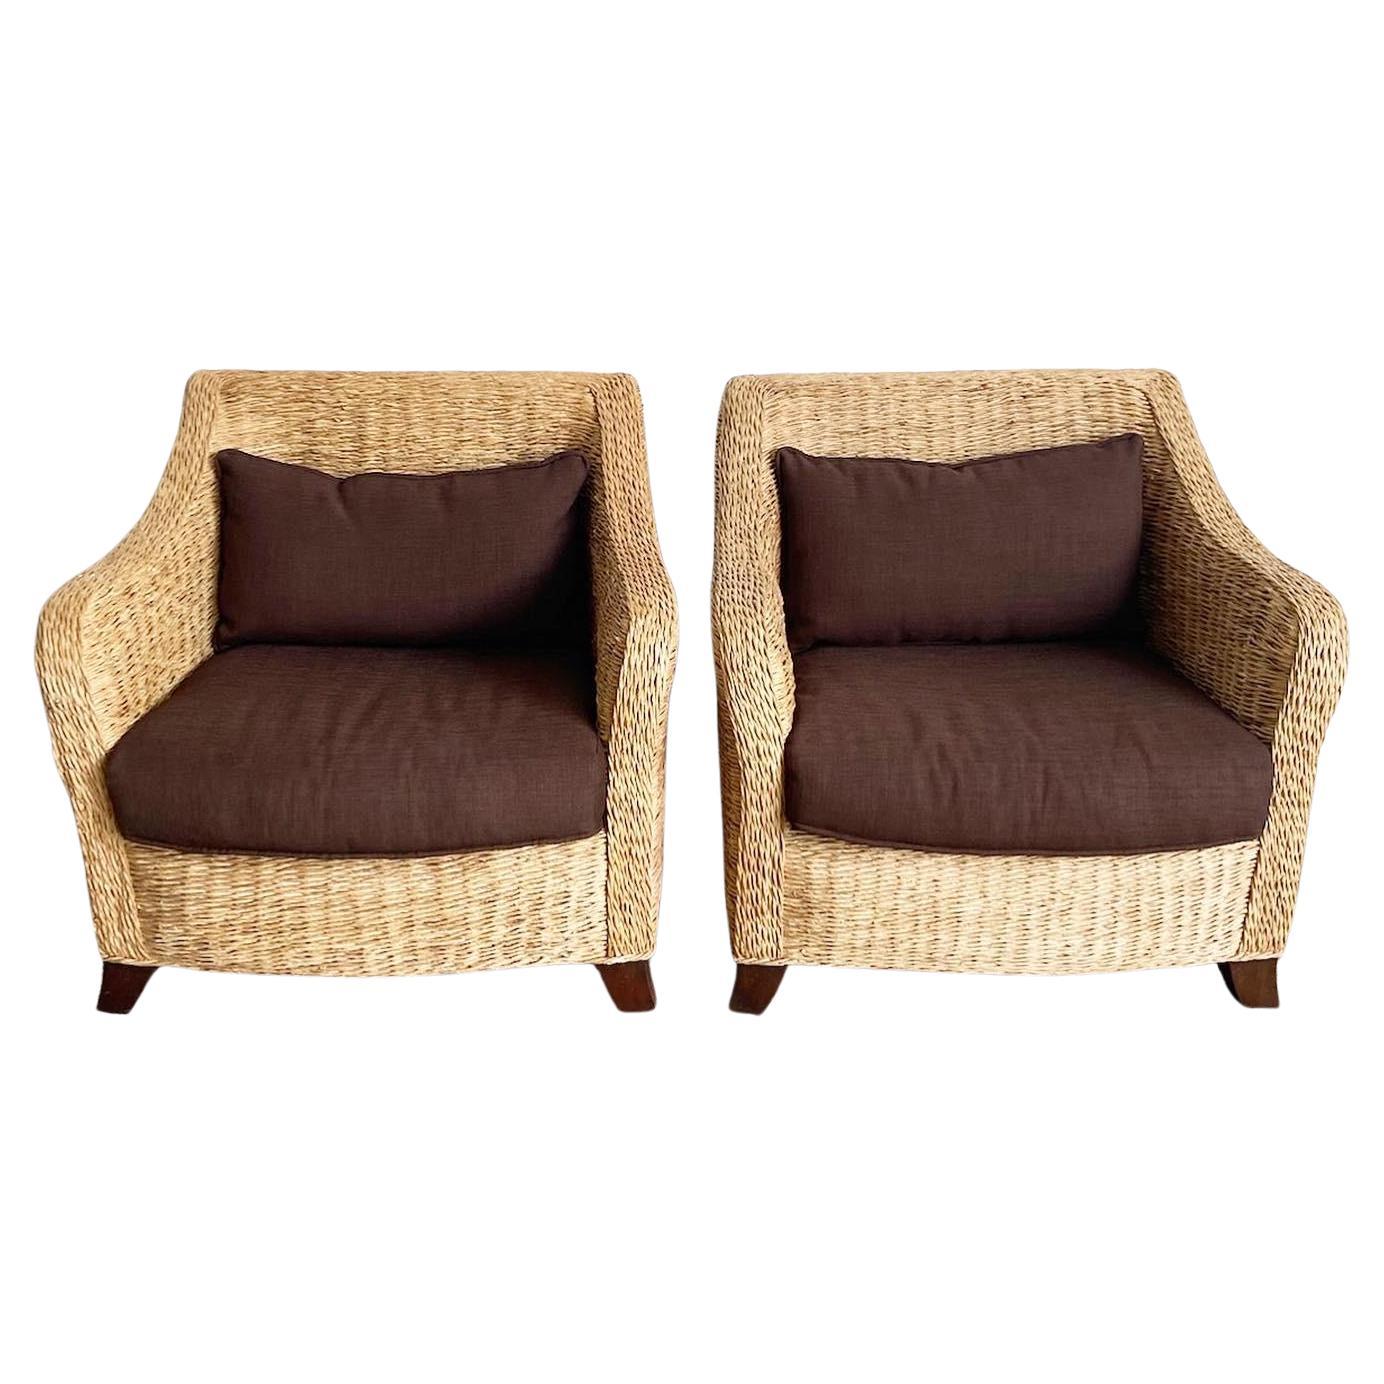 Boho Chic Wicker Arm Chairs With Brown Cushions